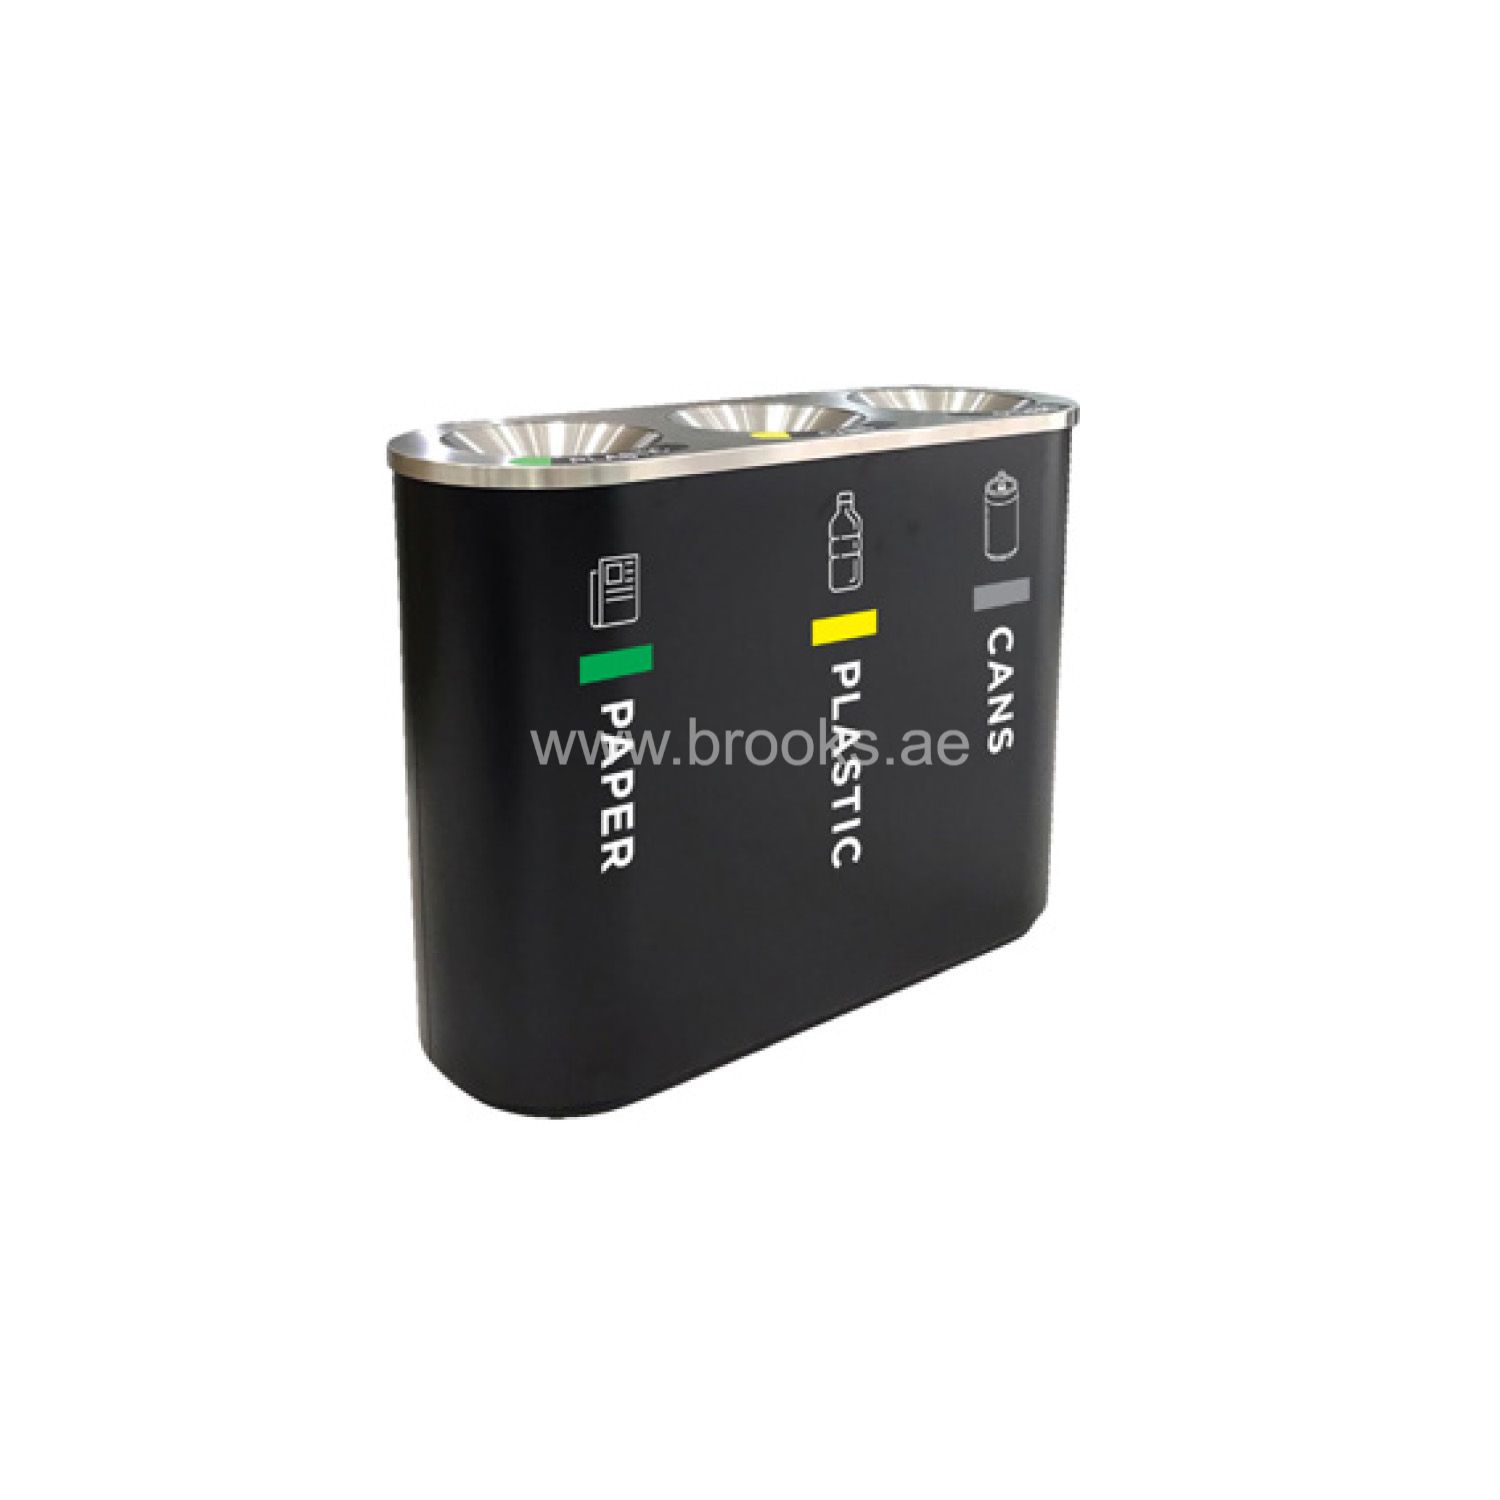 Brooks 3 Stream Recycle Bin Black with silver lid